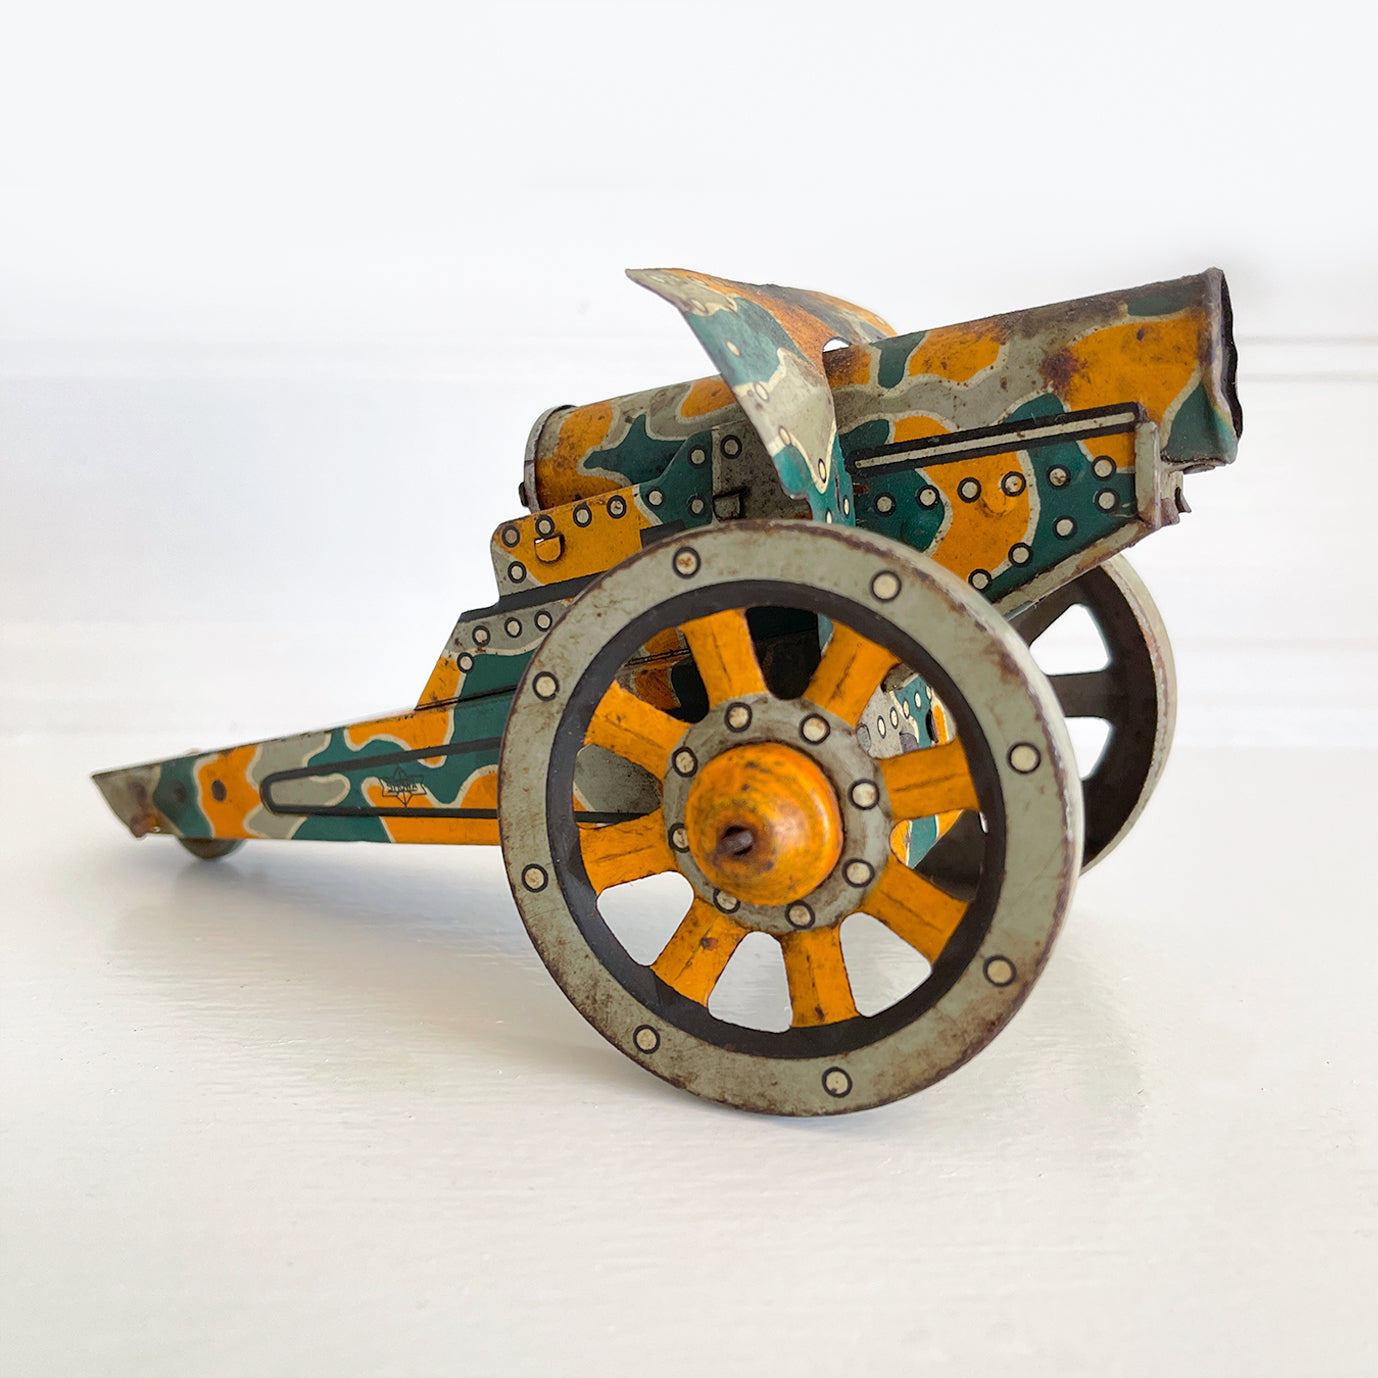 A Pre-War 1930s SHOWA tin-plate clockwork Cannon. It has a clockwork movement, that when wound moves the cannon forward, shooting bright sparks out of the gun barrel then backwards again as if the gun has recoiled! - SHOP NOW - www.intovintage.co.uk